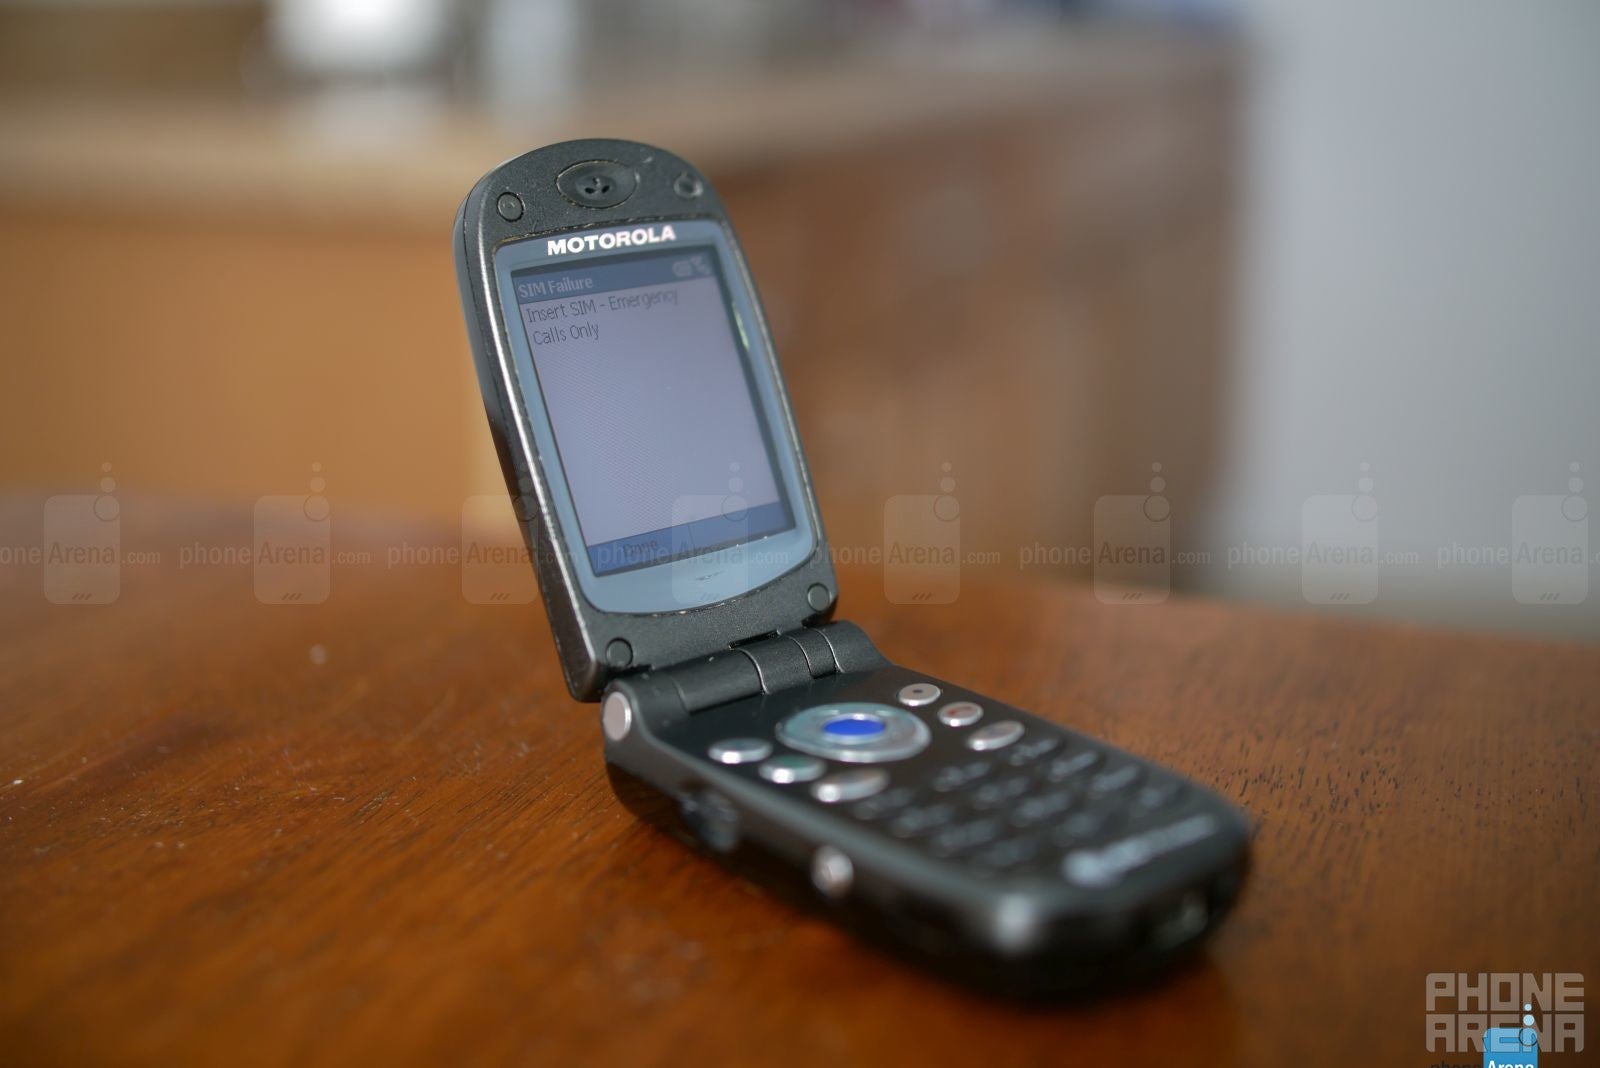 The Motorola MPx200 is notable for being the first GSM/GPRS smartphone released commercially in the United States running Microsoft&#039;s Windows Mobile Smartphone 2002 operating system, - Old-school phones, modern reincarnations: Motorola MPx200